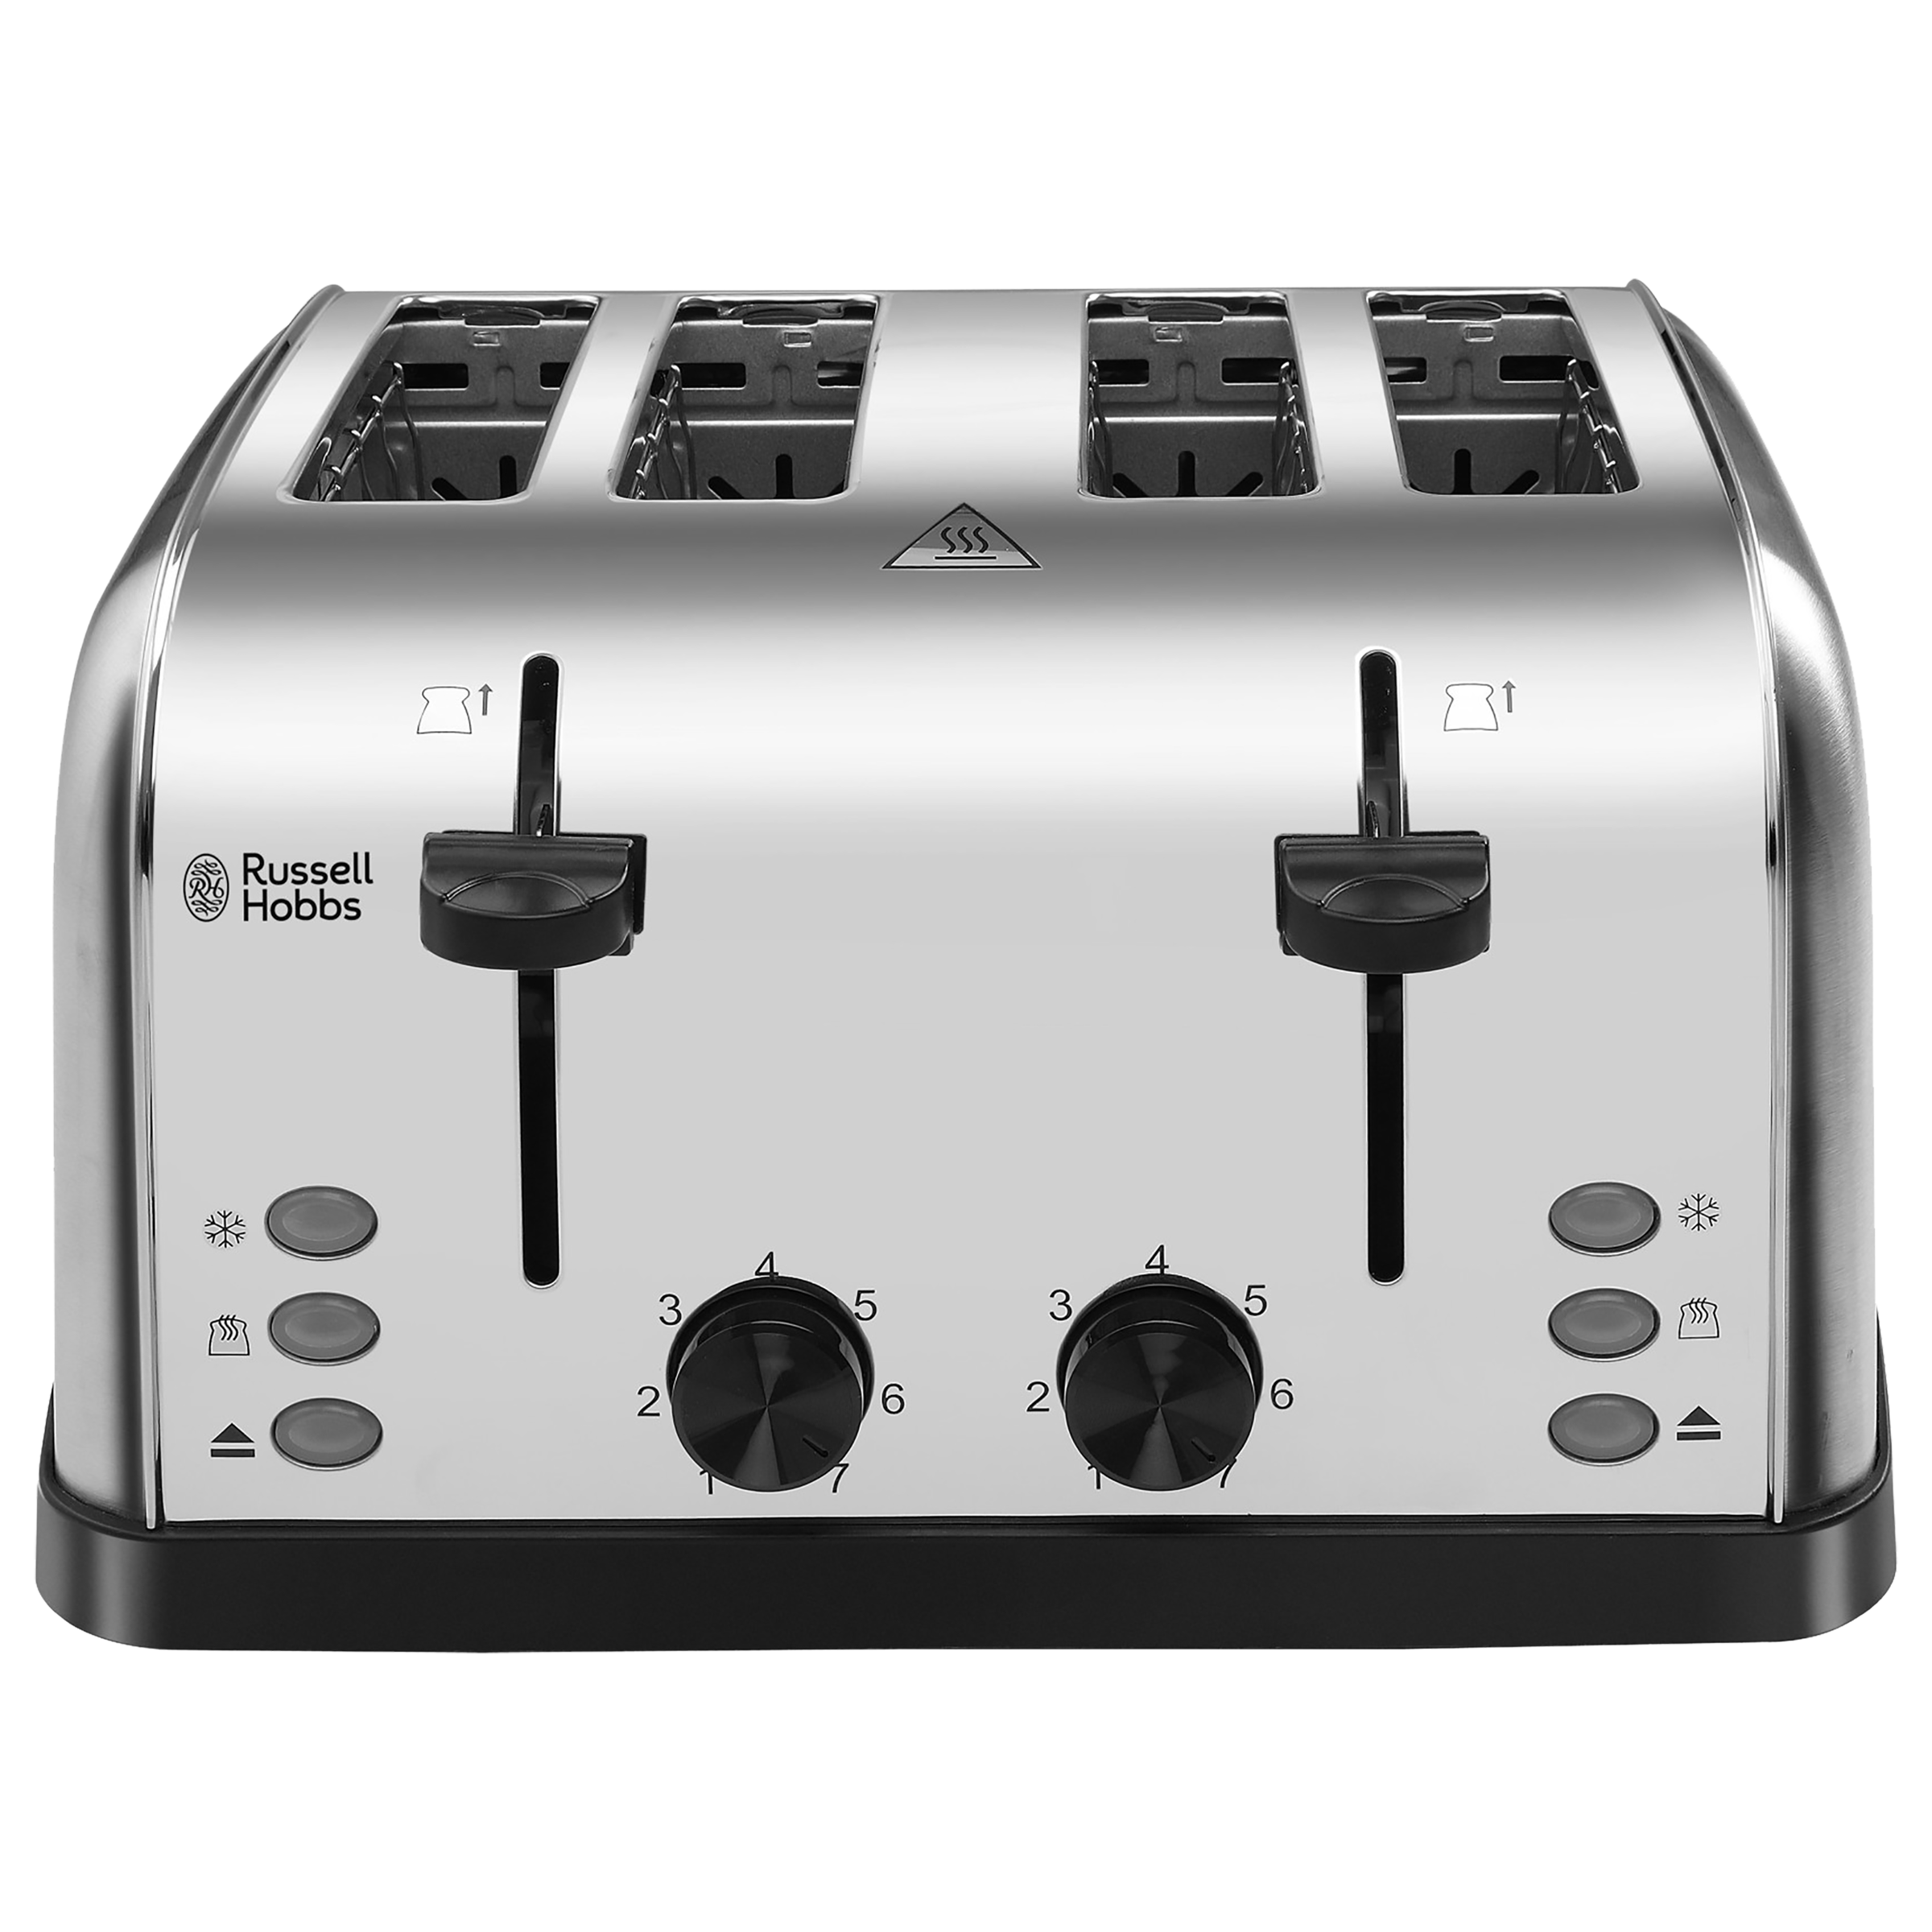 Russell Hobbs 18790 1500 Watts 4 Slice Automatic Pop-Up Toaster (Removable Crumb Tray, Silver)